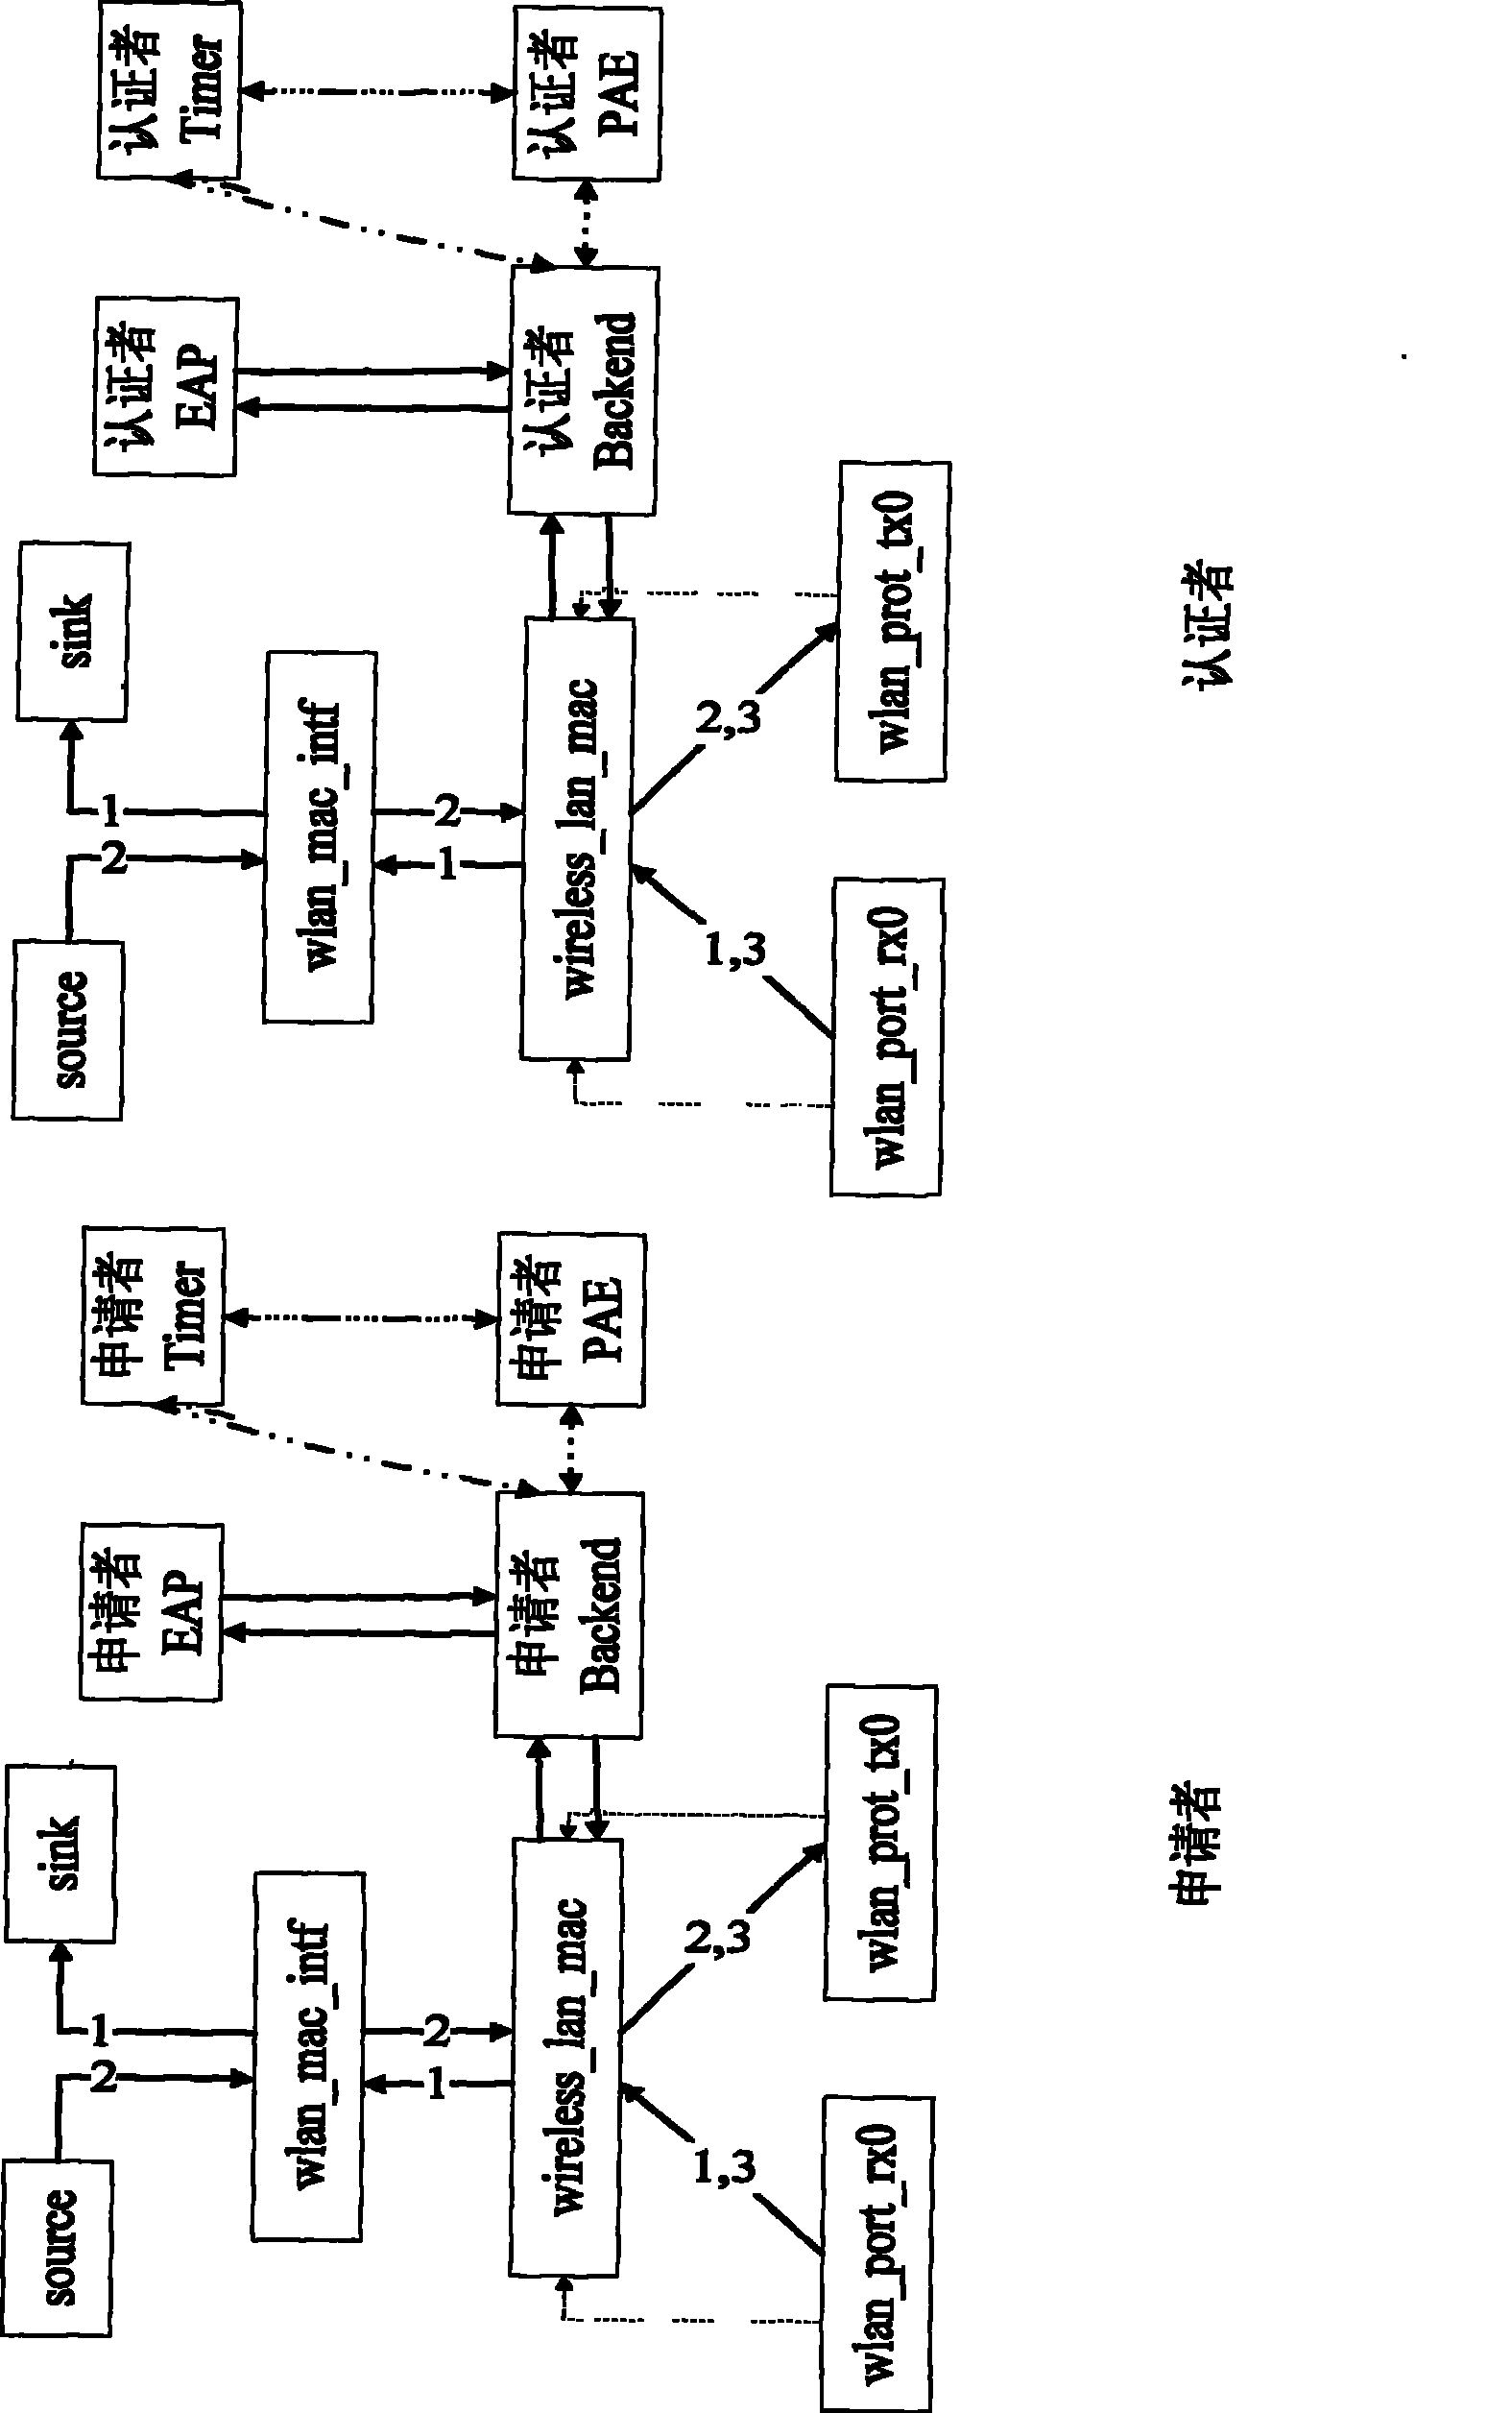 Simulation platform and method based on IEEE802.1X security protocol of EAP